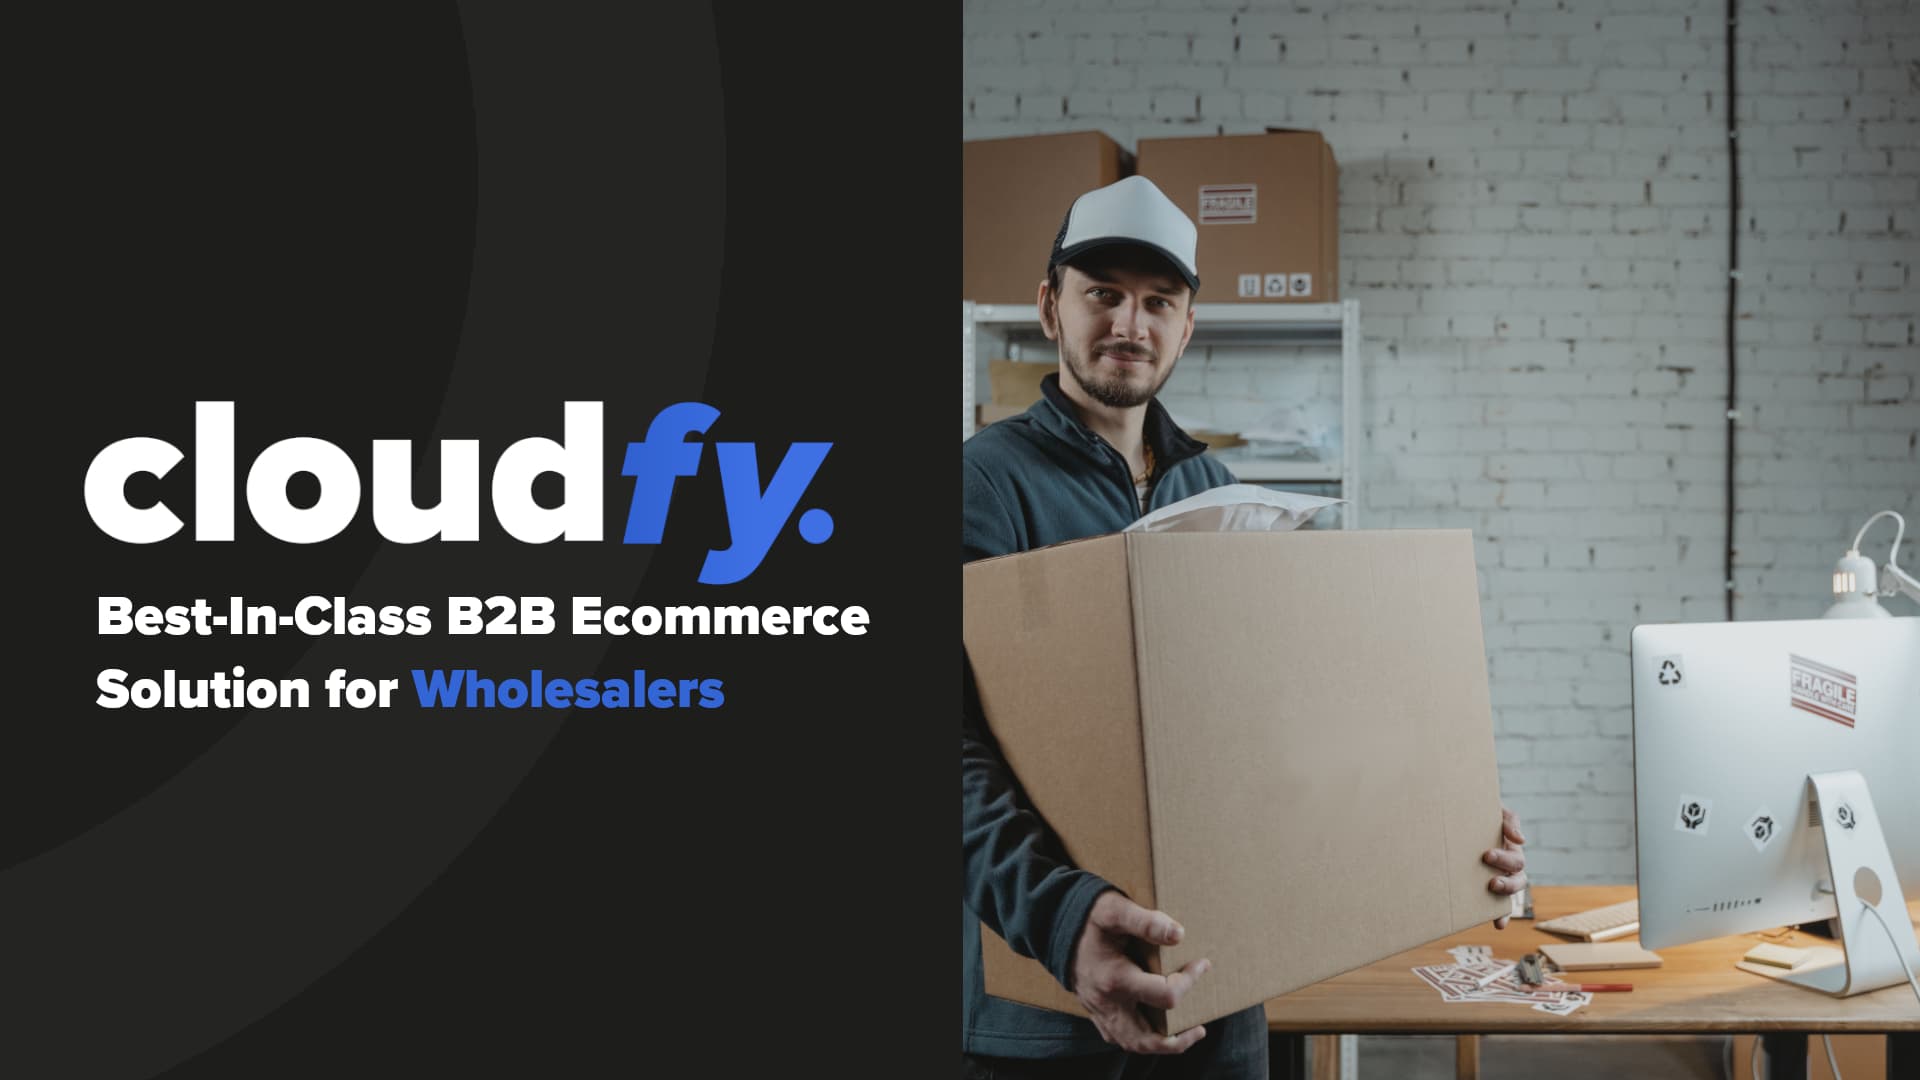 screenshot of YouTube video about B2B ecommerce software for wholesalers